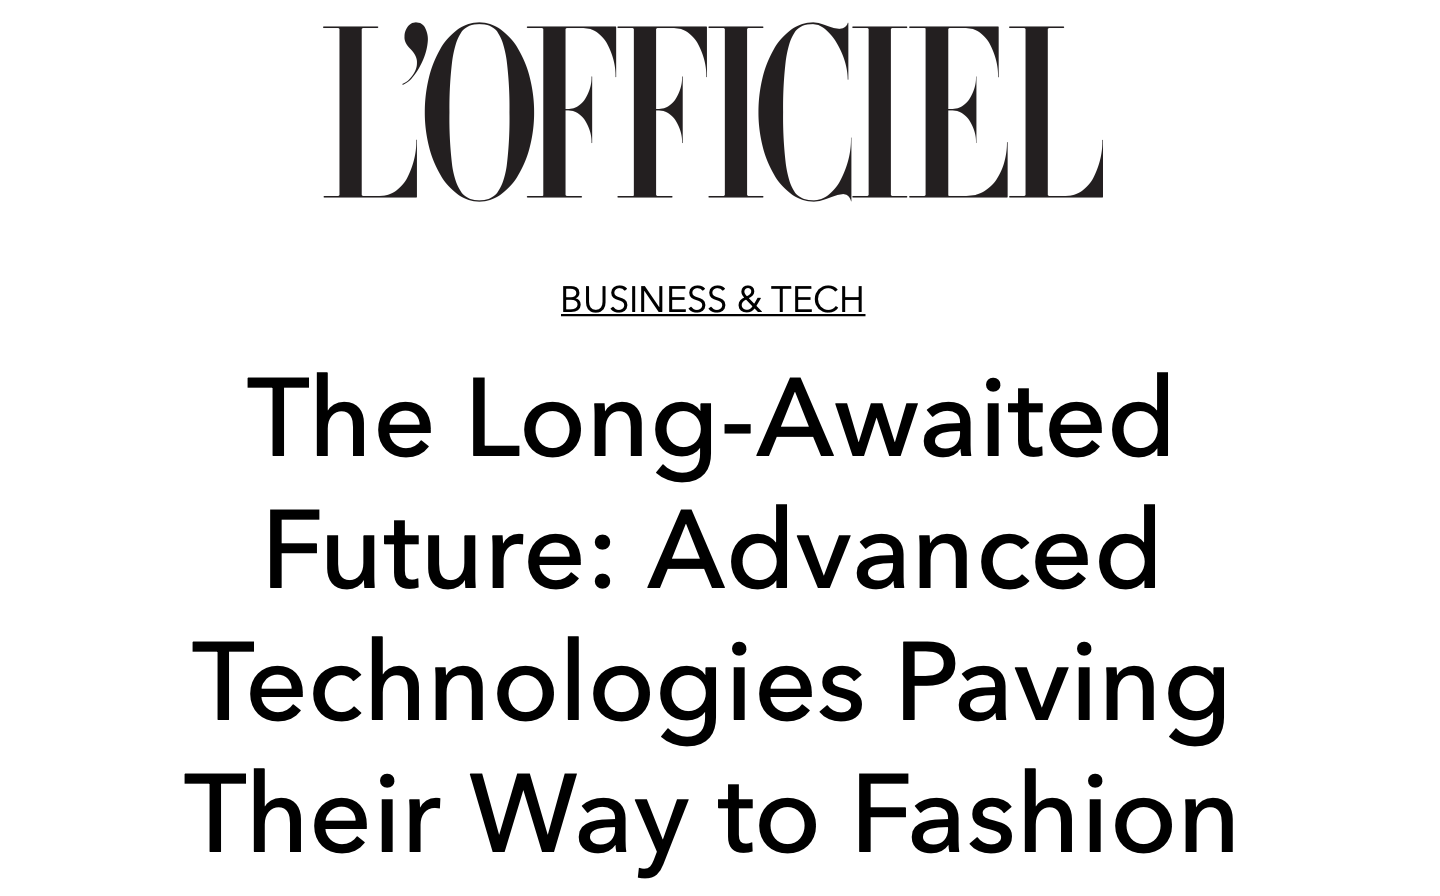 The Long-Awaited Future: Advanced Technologies Paving Their Way to Fashion